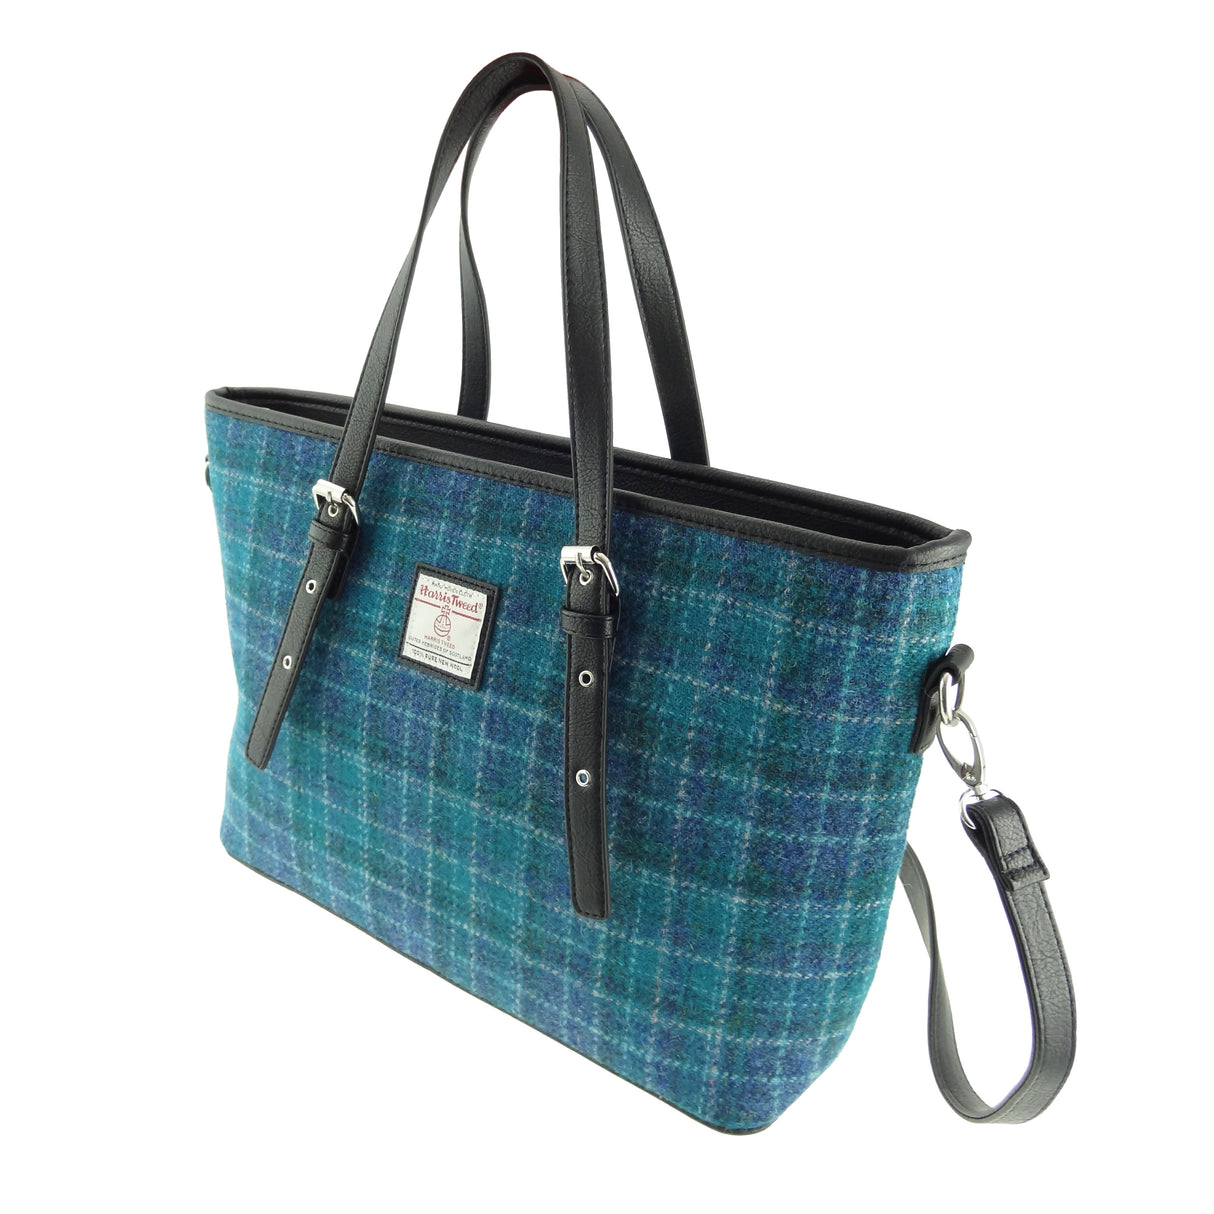 Sea Blue Check Scottish Harris Tweed Women's Large Tote Bag with Shoulder Strap Glen Appin of Scotland